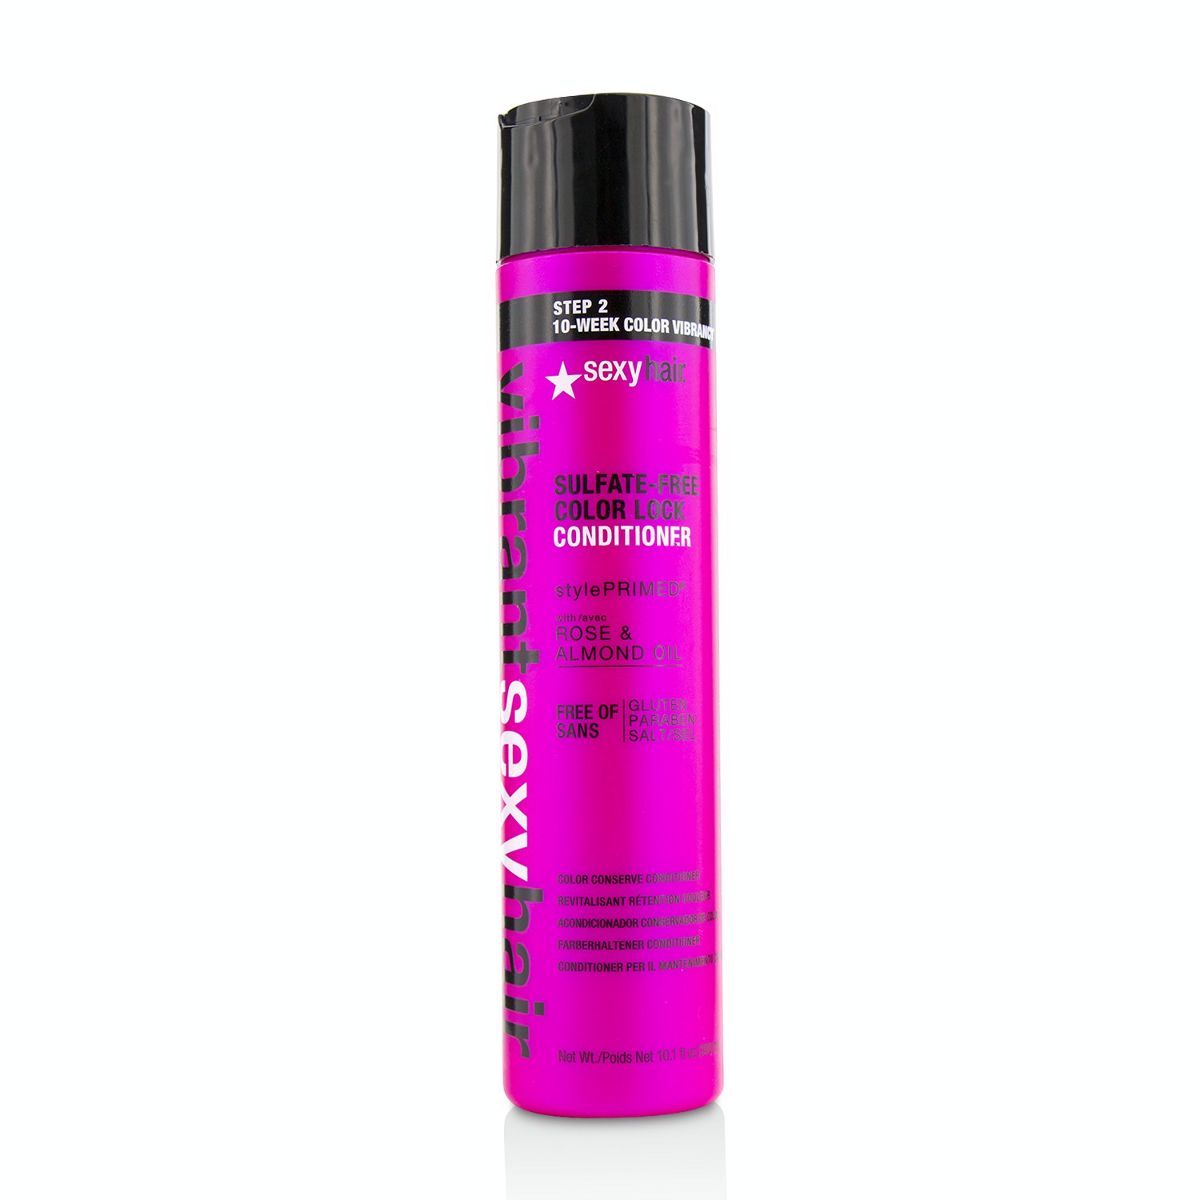 Vibrant Sexy Hair Color Lock Color Conserve Conditioner Sexy Hair Concepts Image